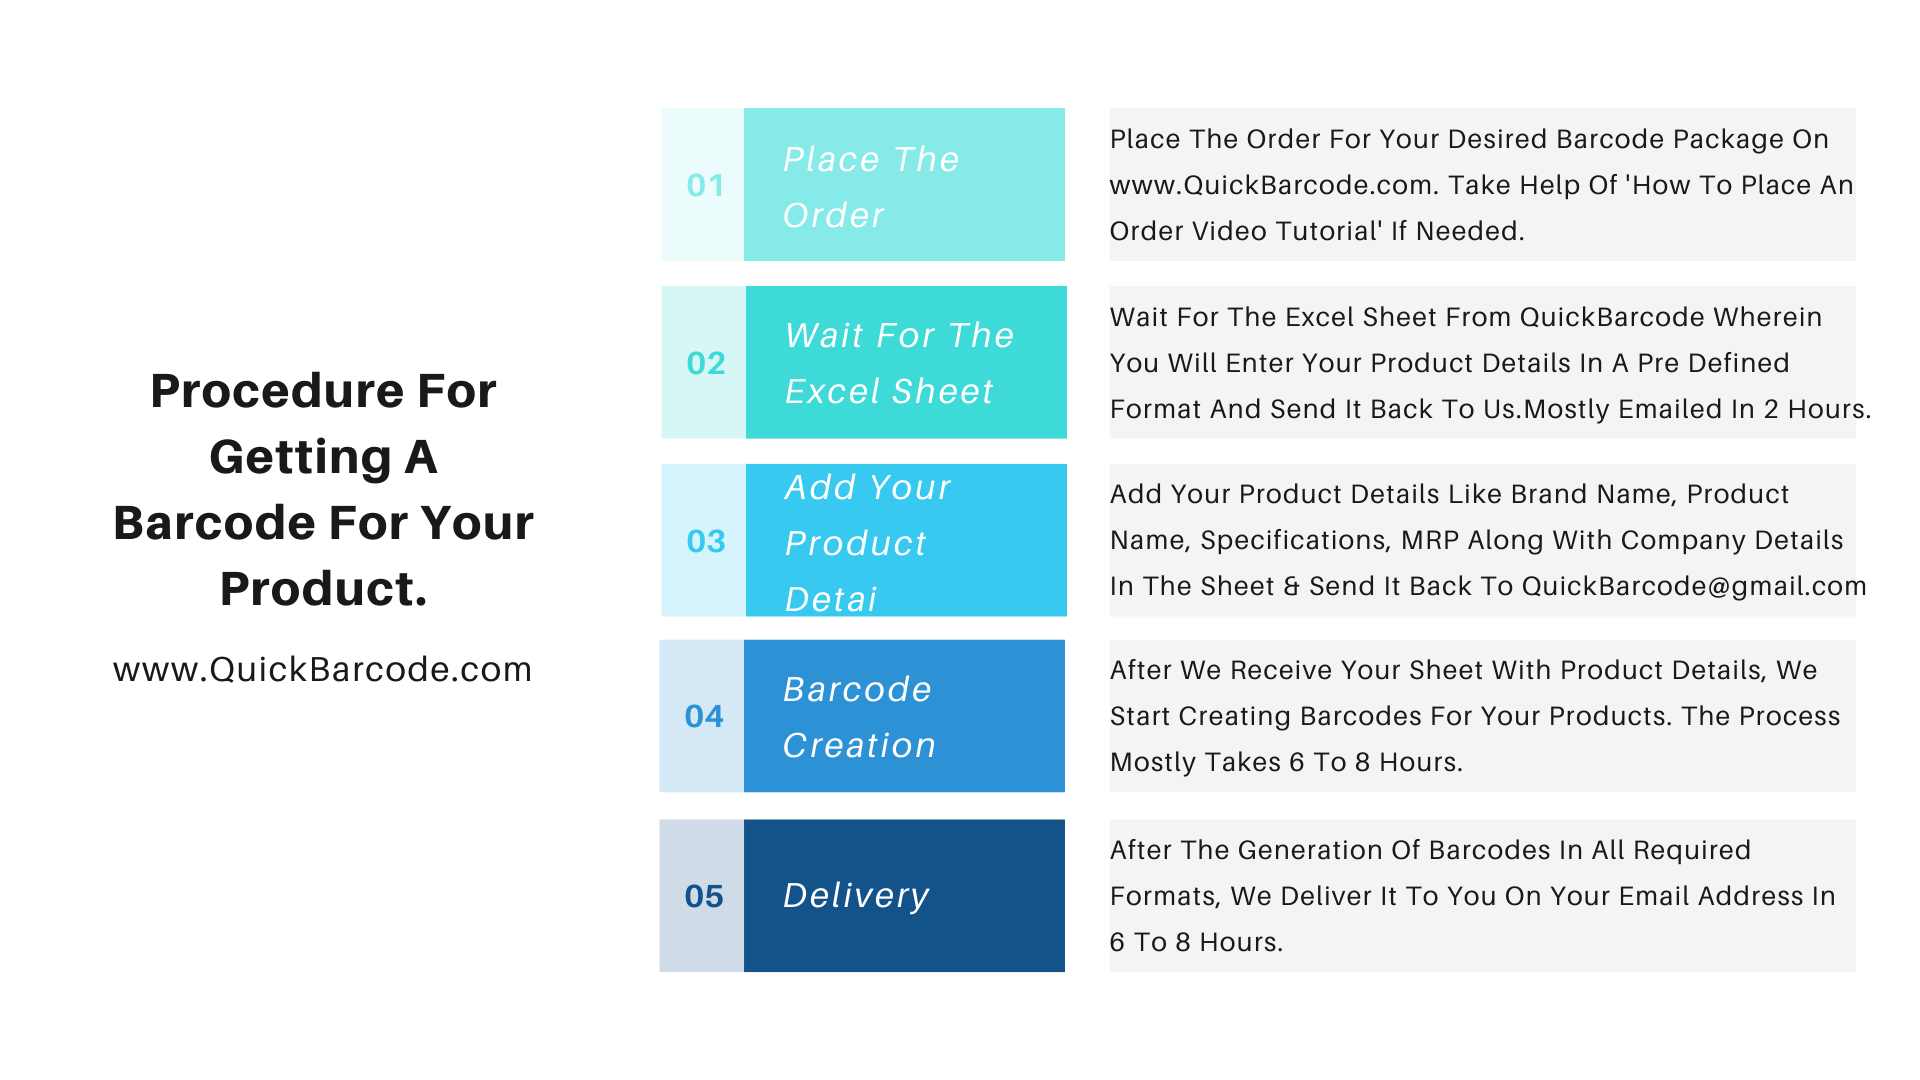 Procedure For Getting A Barcode For Your Product.